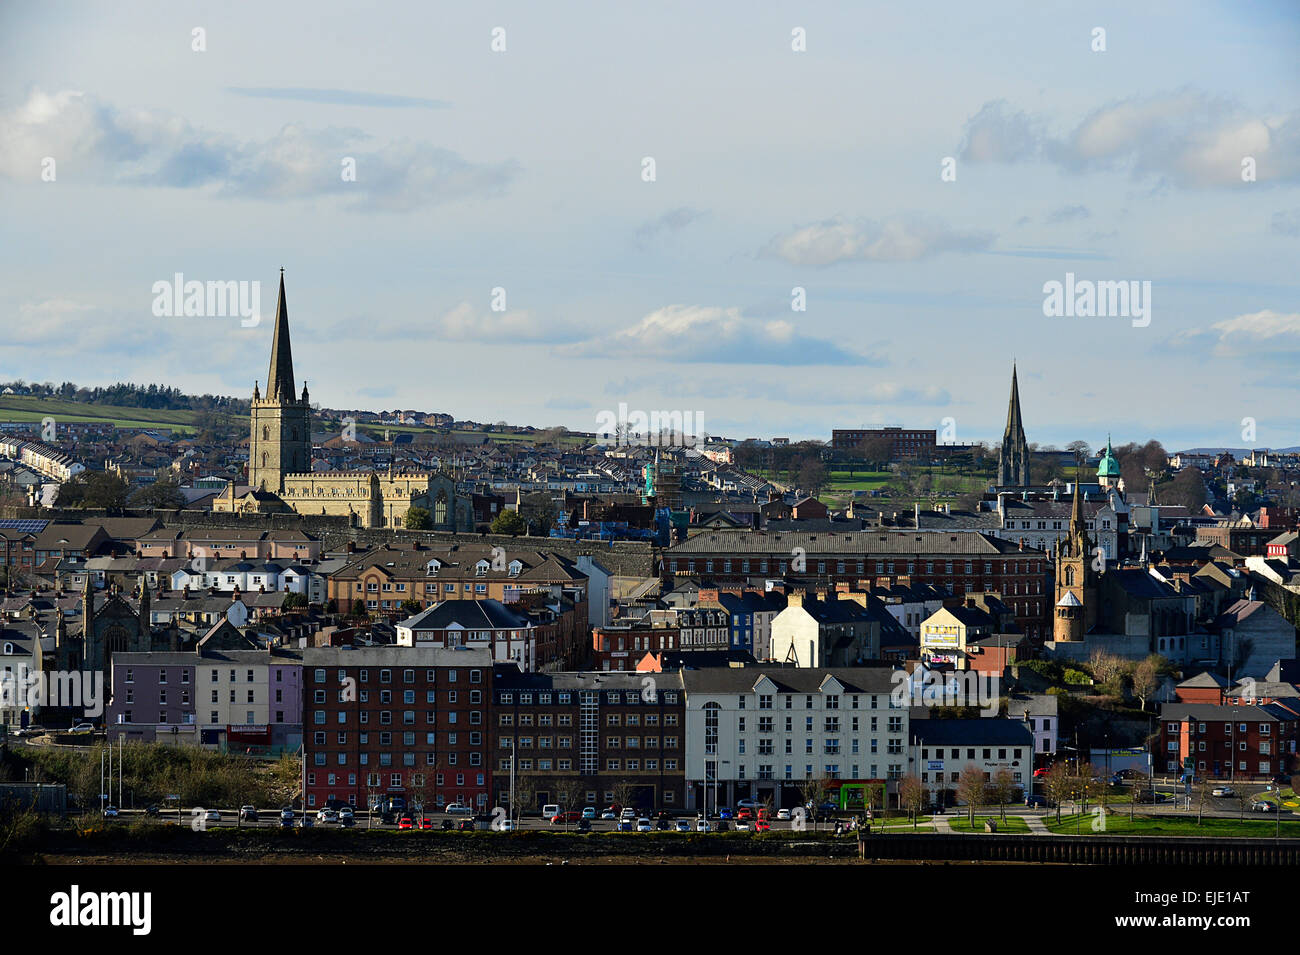 Londonderry, Derry, skyline, cattedrali e chiesa. Foto Stock